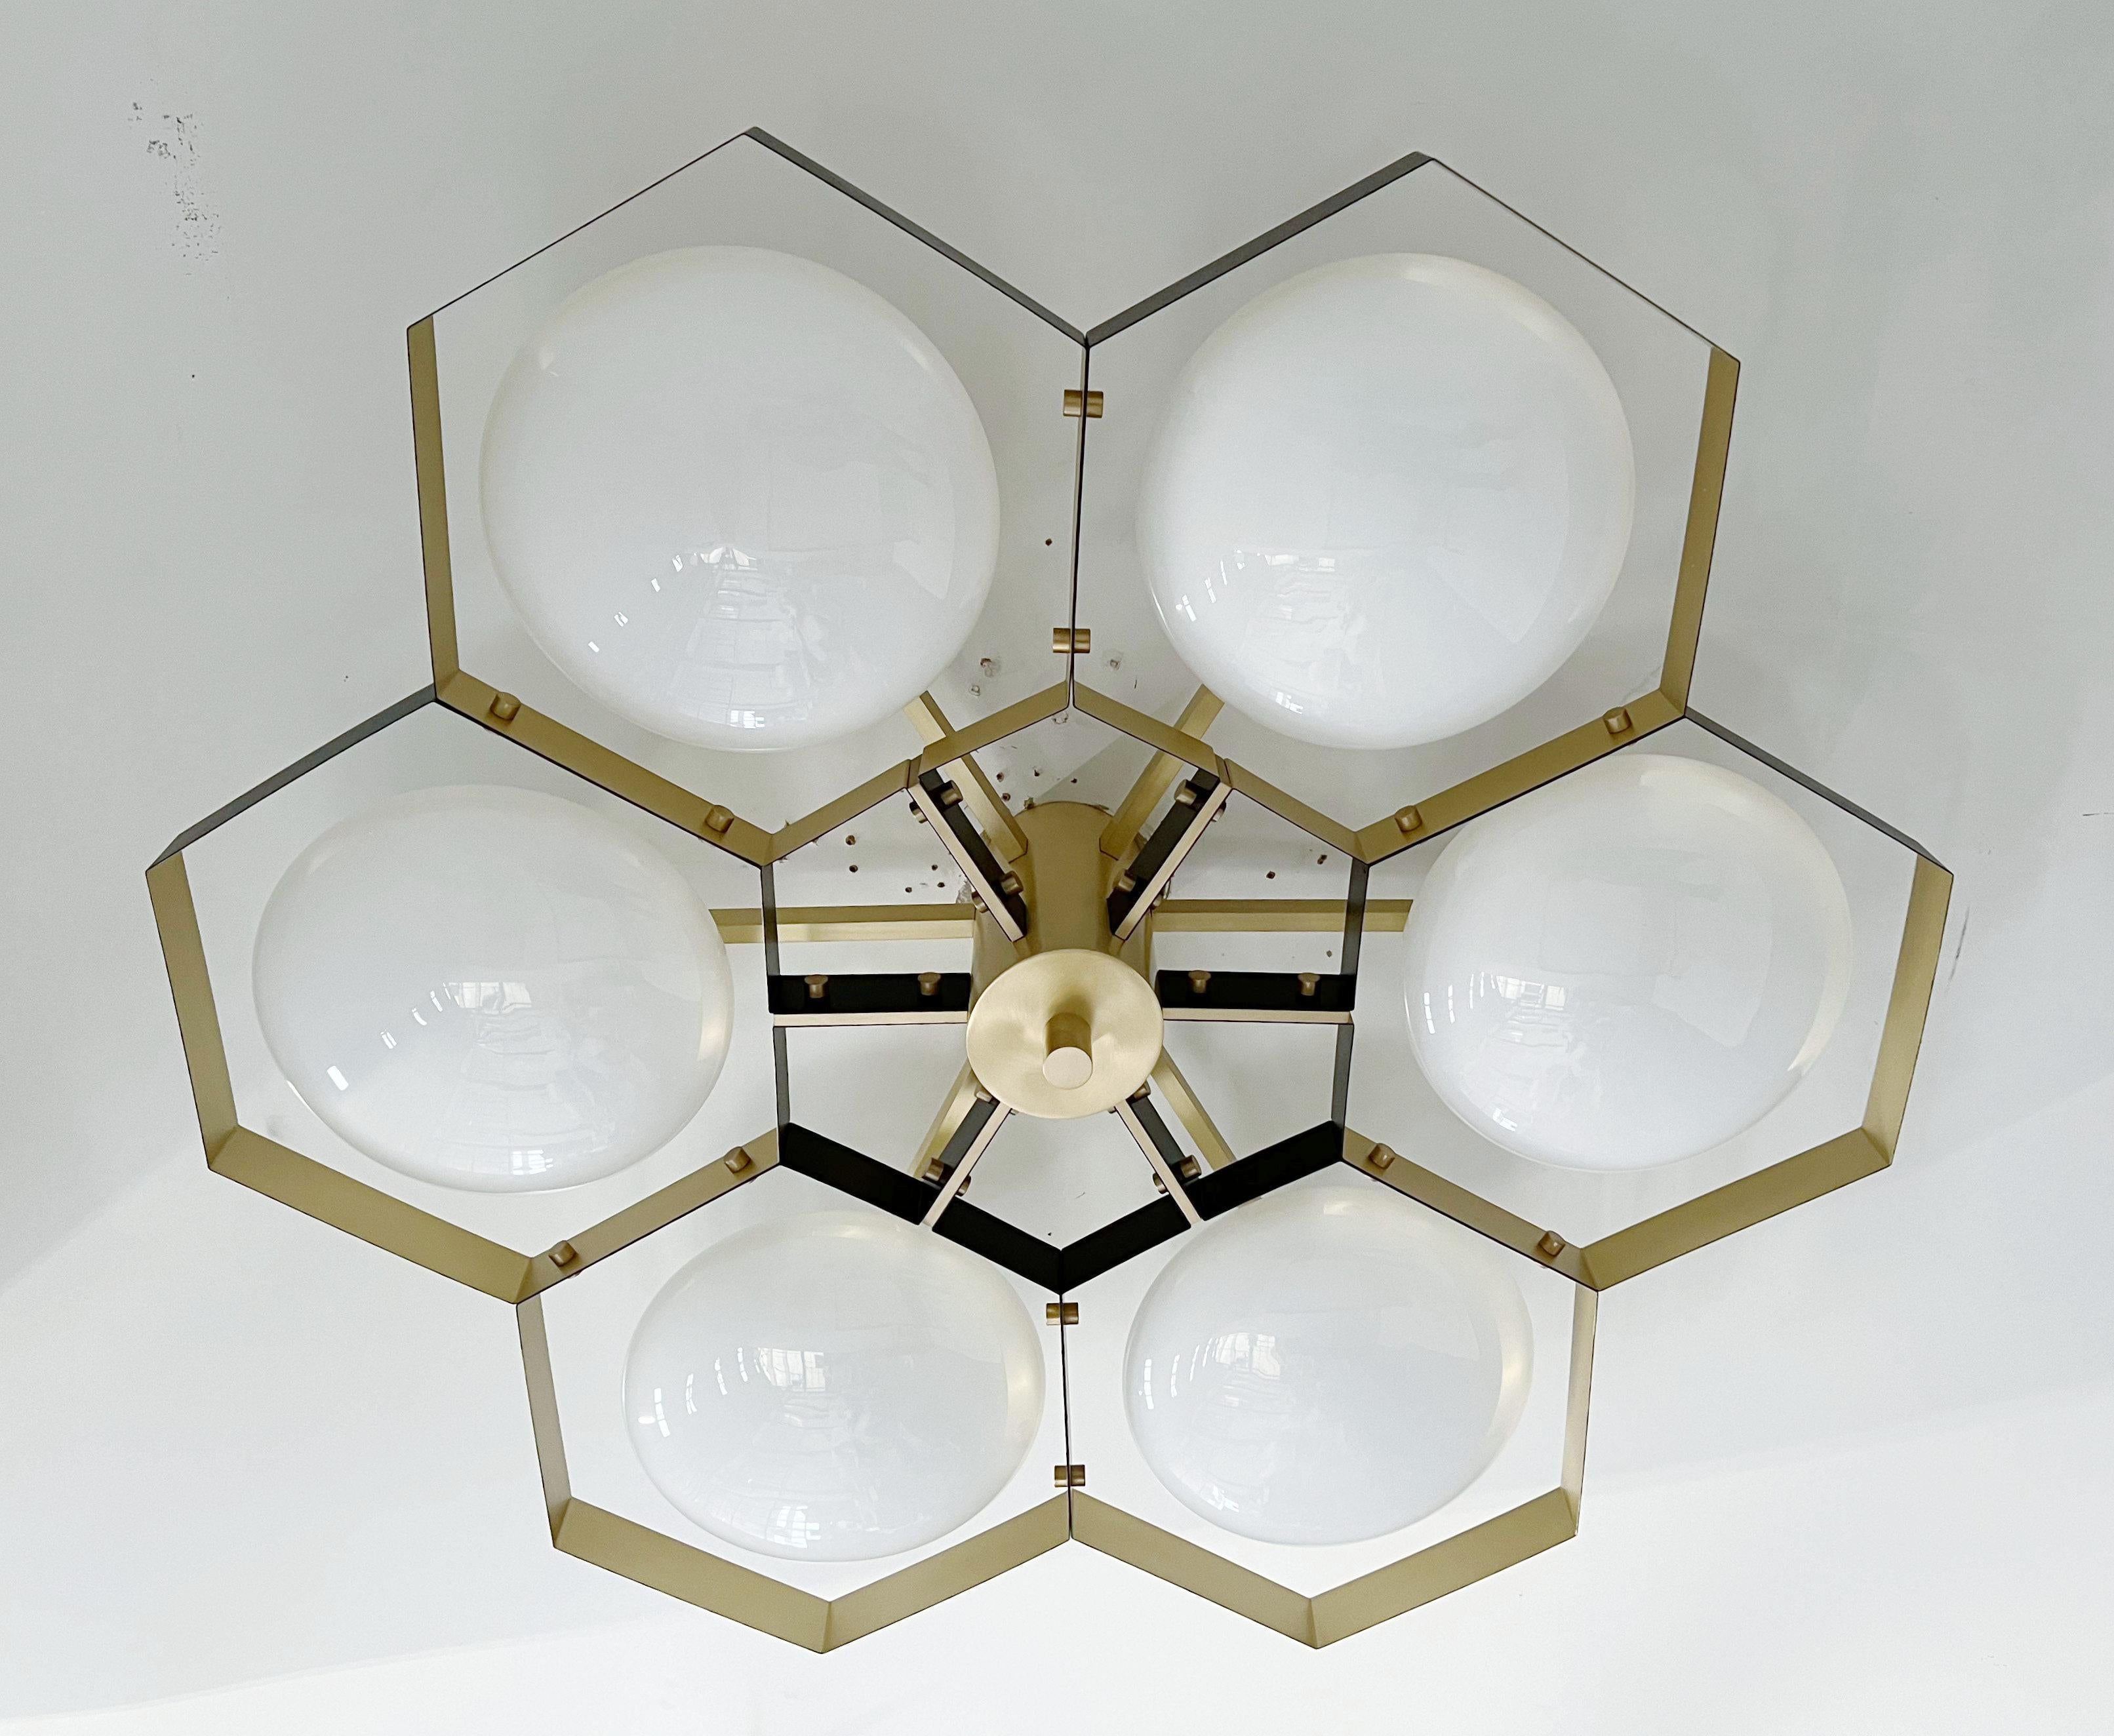 Italian flush mount with Murano glass shades mounted on solid brass frame / Made in Italy
Designed by Fabio Ltd, inspired by Angelo Lelli and Arredoluce styles
6 lights / E12 or E14 / max 40W each
Measures: Diameter 43 inches / height 10